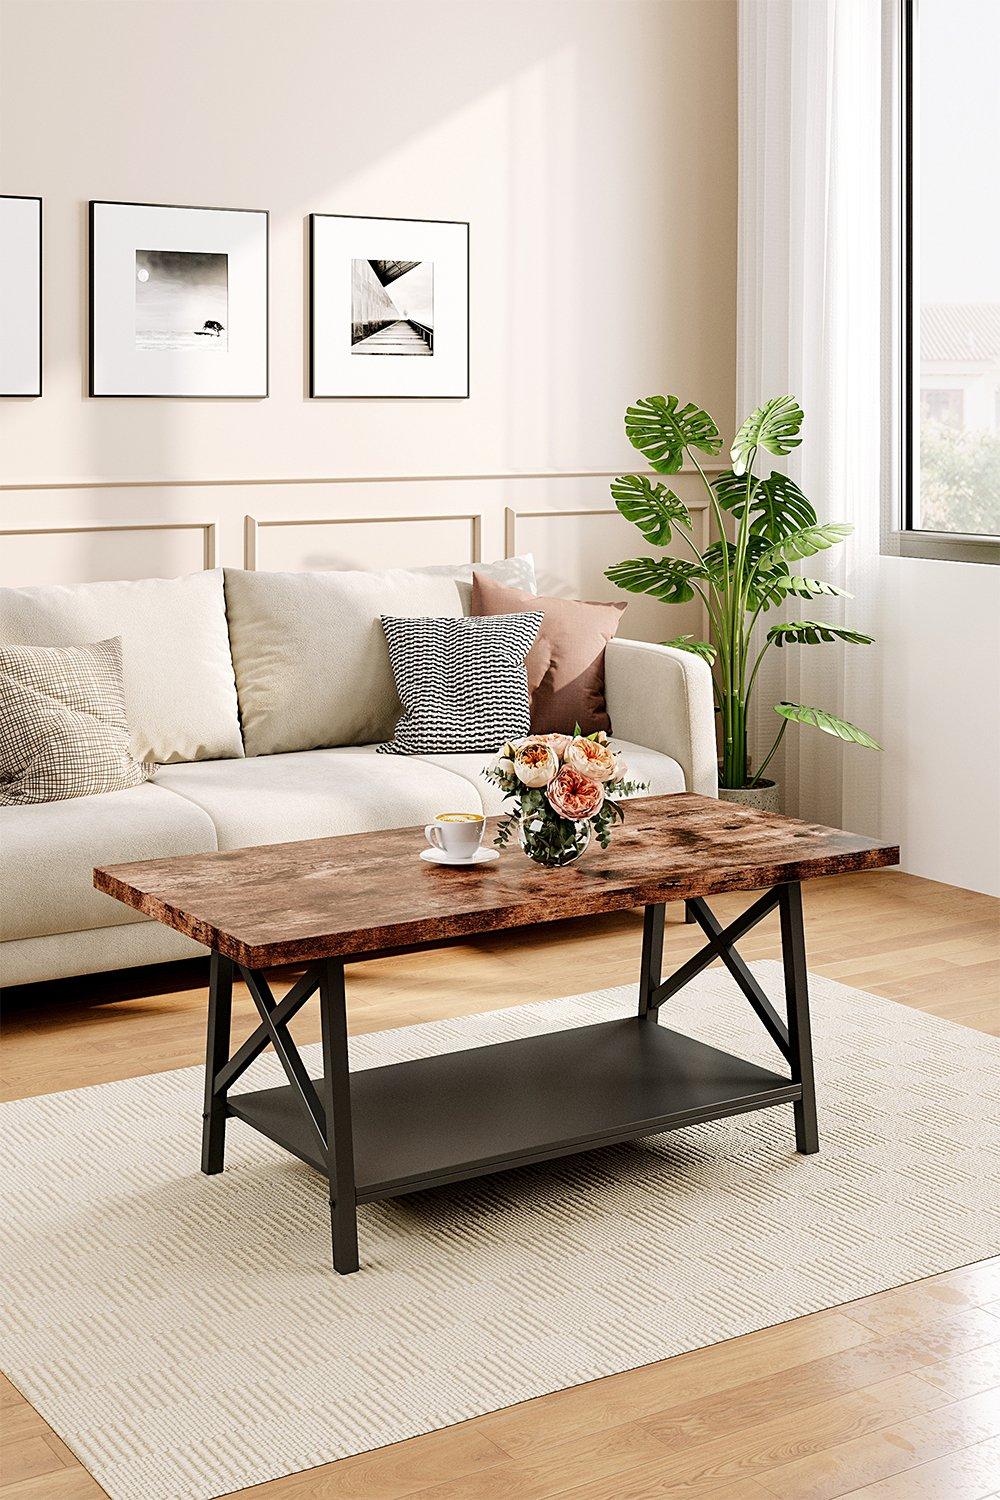 2-Tier Industrial Style Coffee Tea Table with Storage Shelf